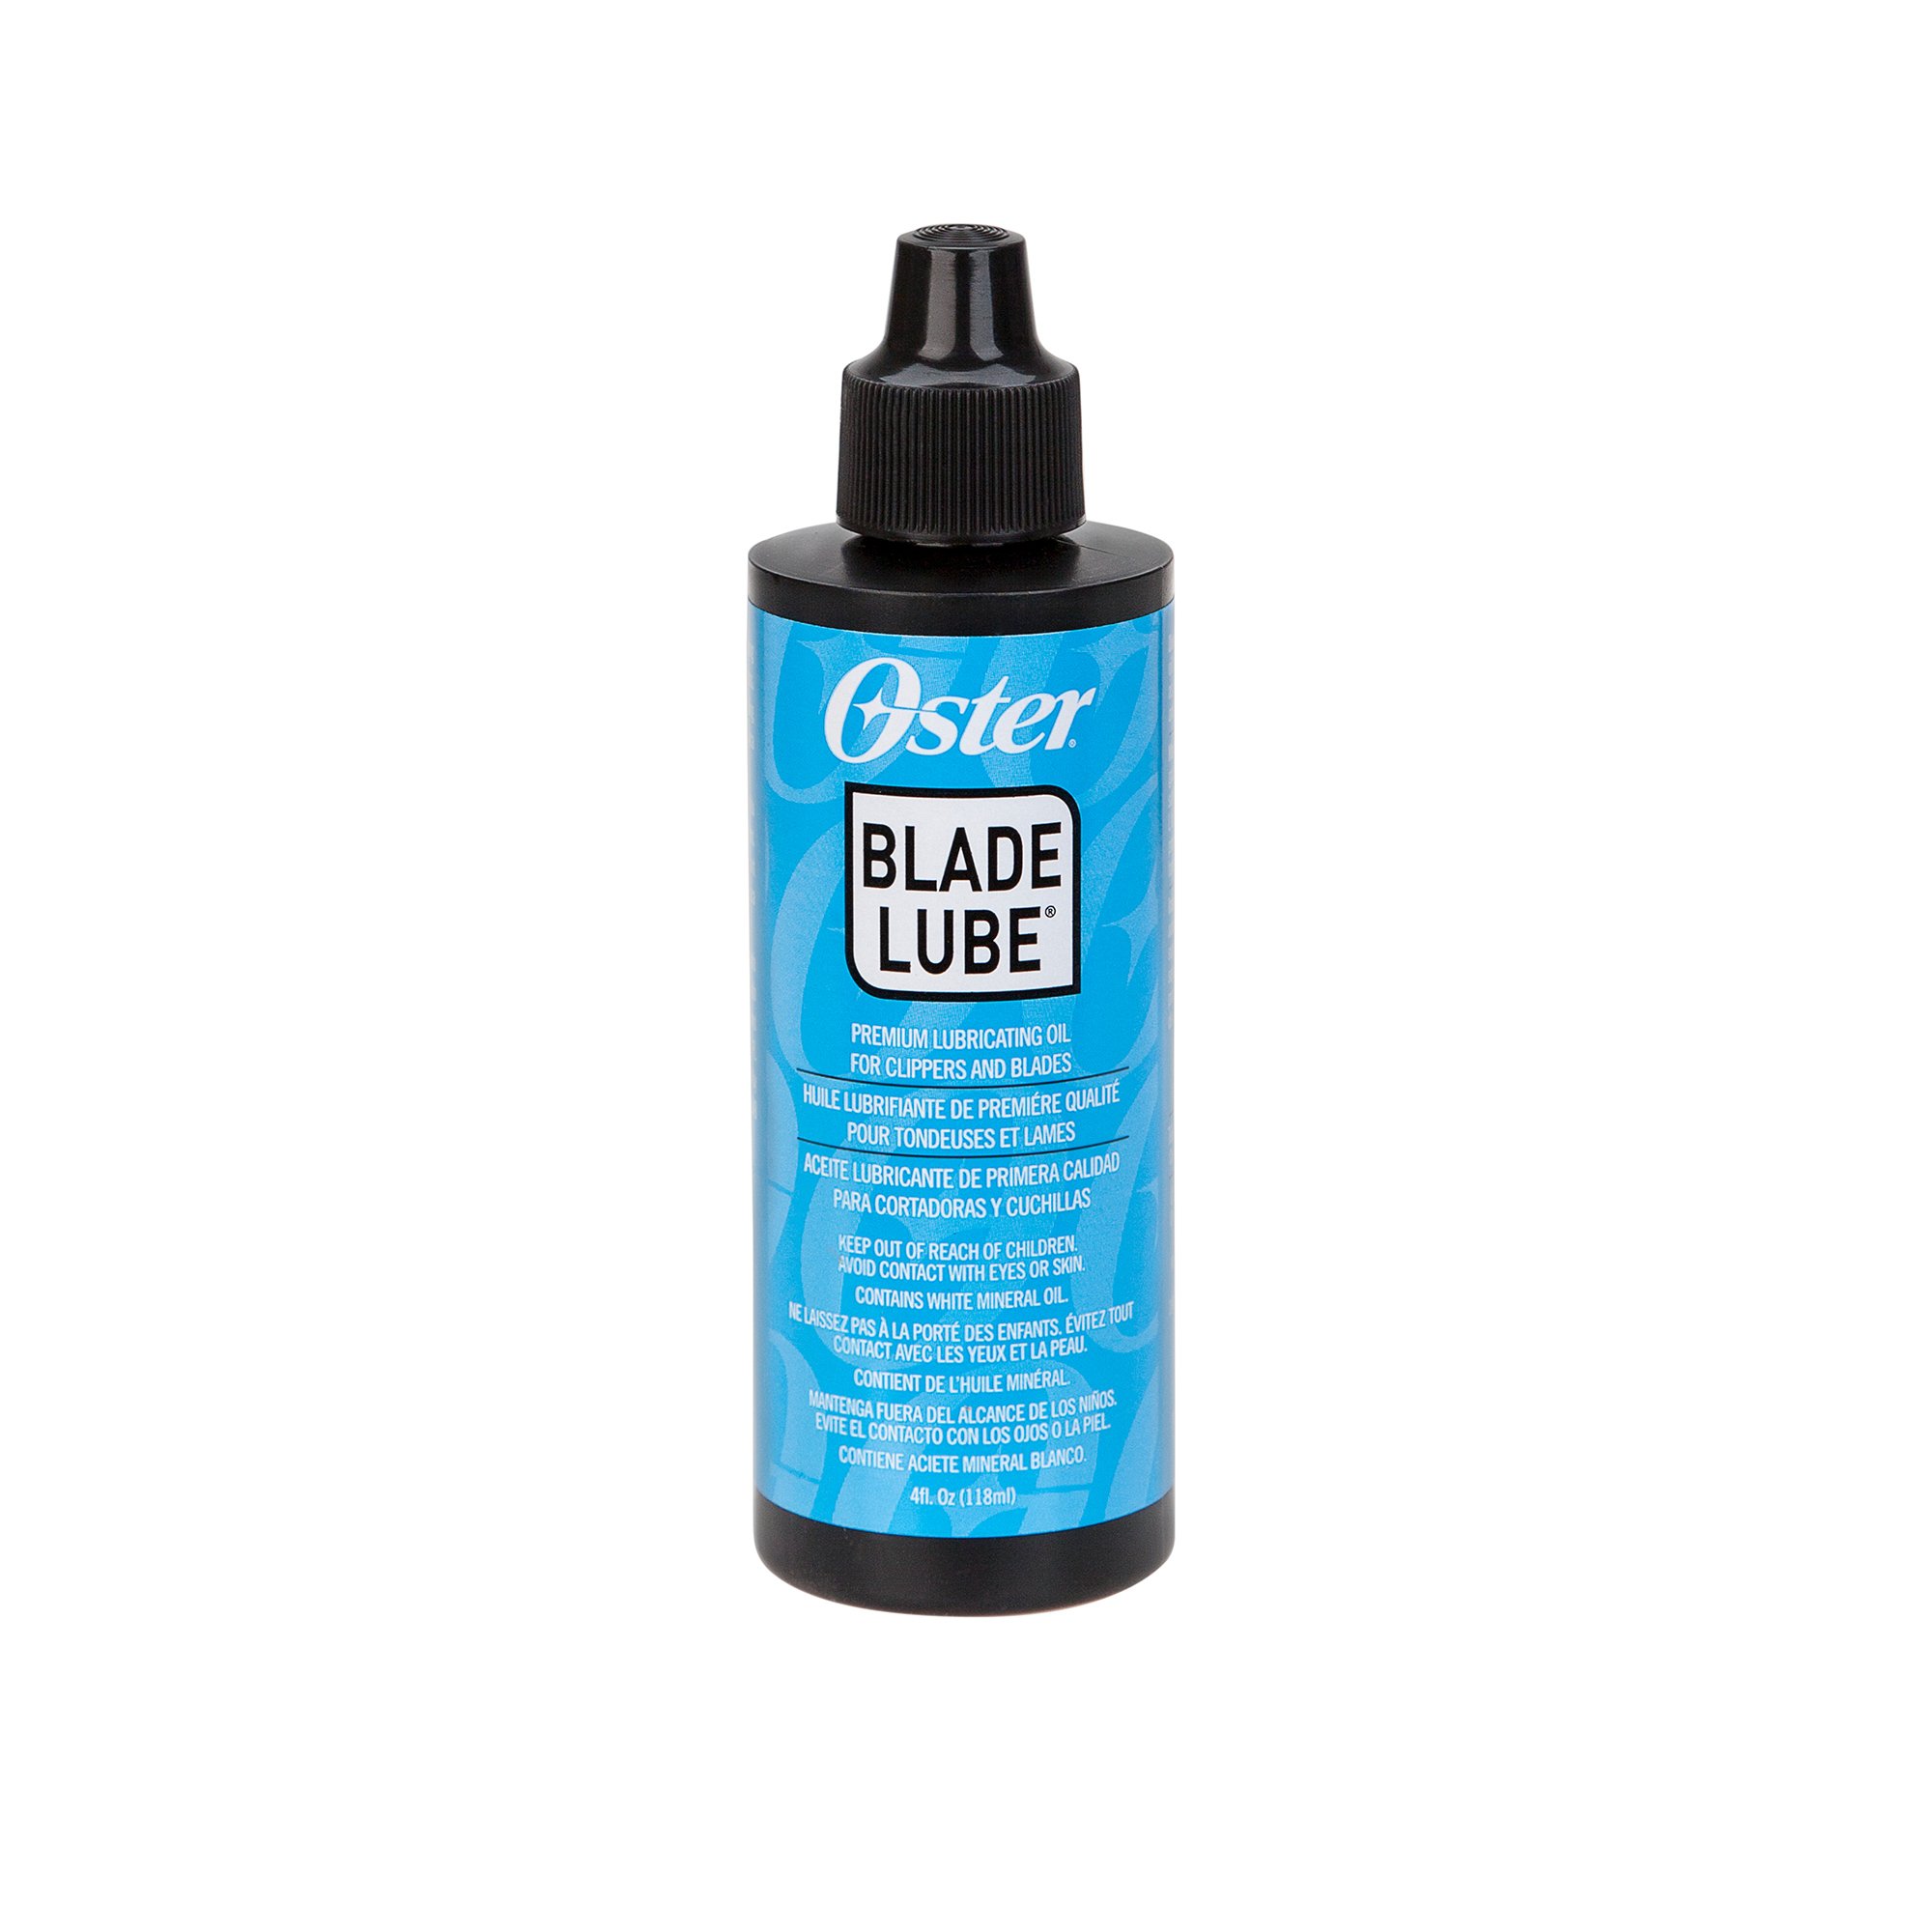 Oster Premium Blade Lube for Clippers and Blades, 4 Fluid Ounces (076300-104-000),Black